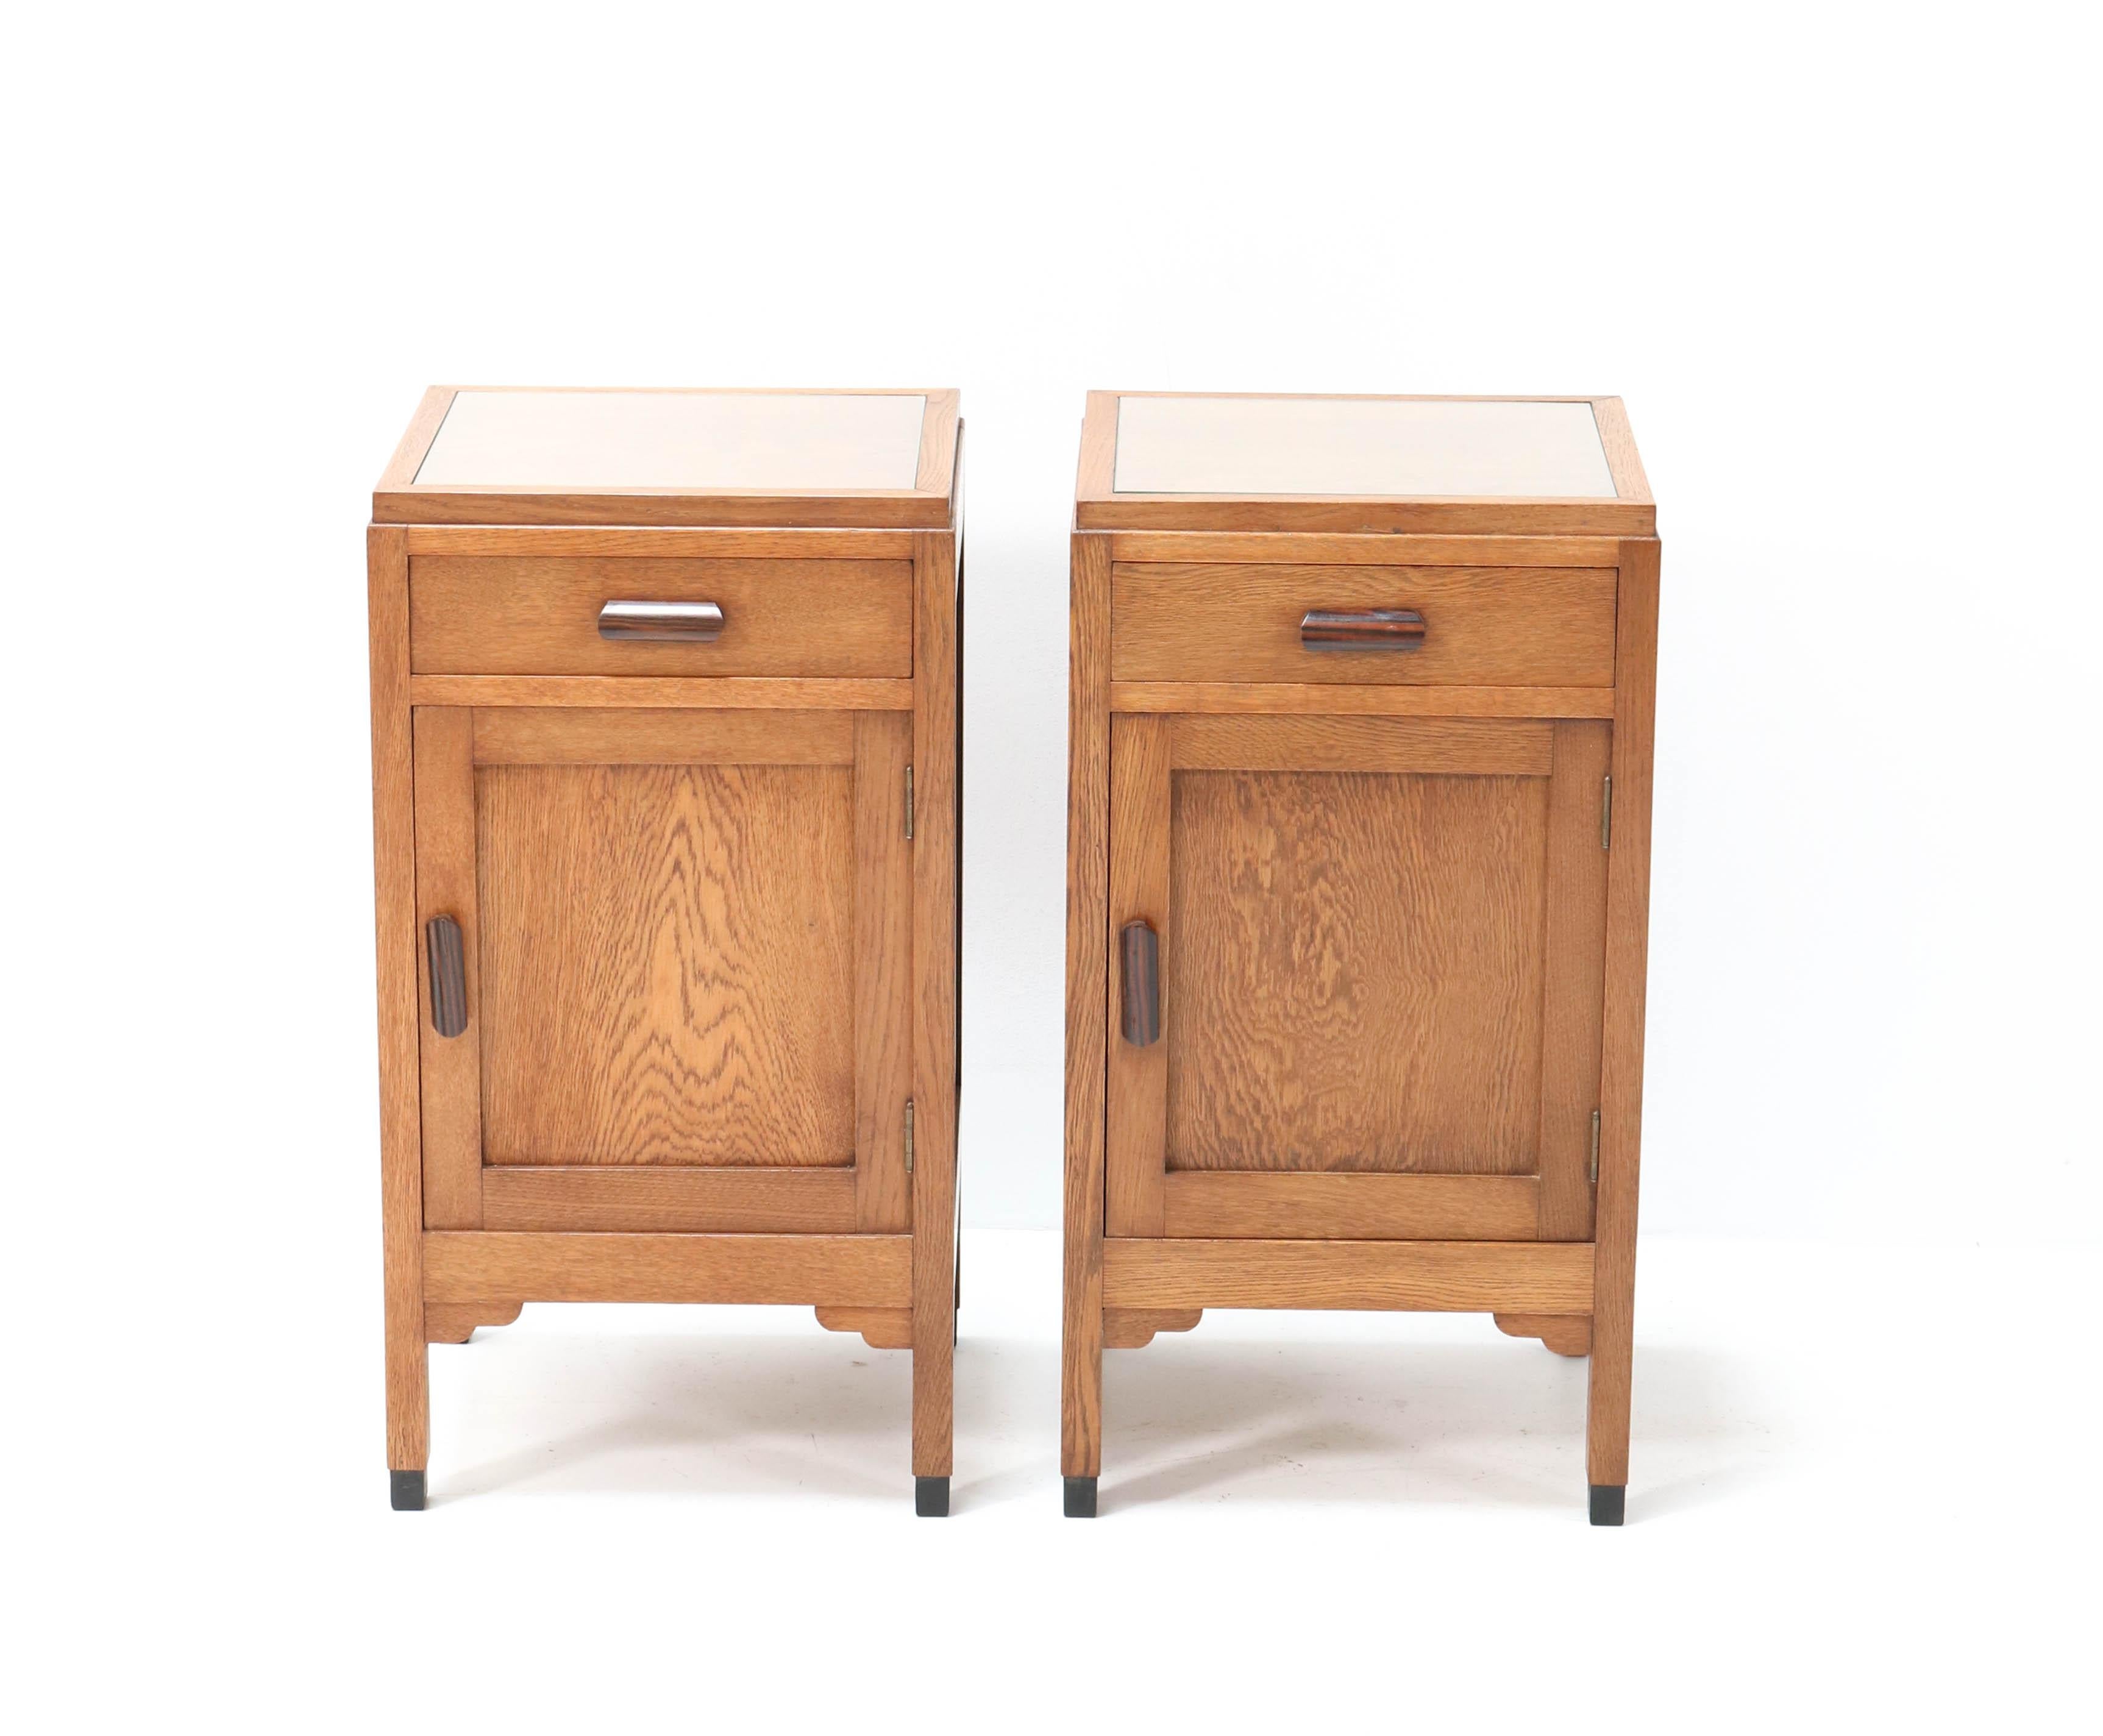 Wonderful and rare pair of Art Deco Amsterdam School nightstands or bedside tables.
Design by Fa. Drilling Amsterdam.
Striking Dutch design from the 1920s.
Solid oak with original solid Macassar ebony handles.
In very good condition with a